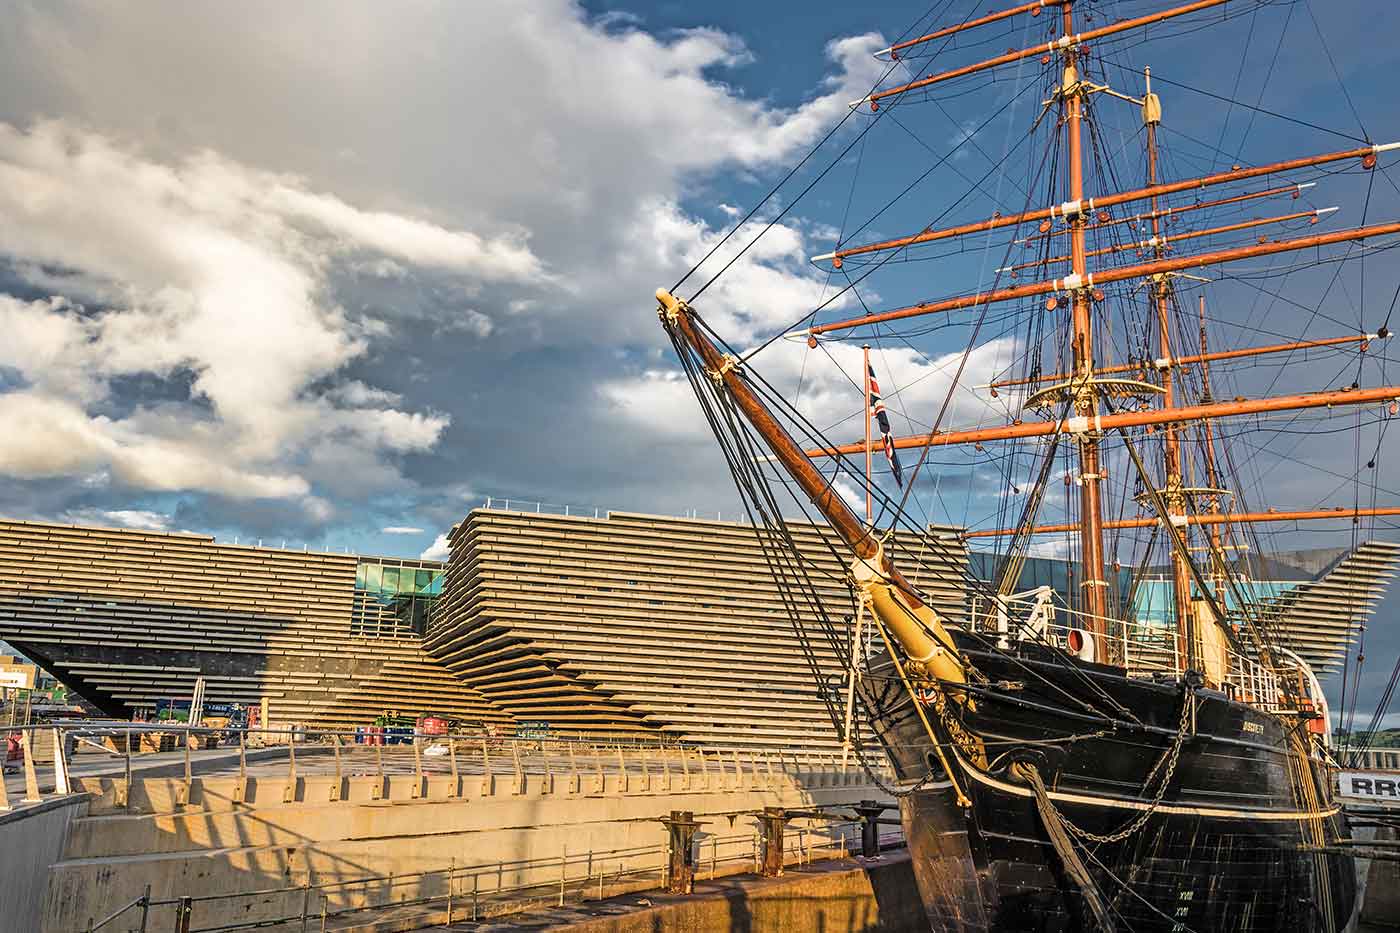 18 Wonderful Tourist Places to Visit and Things to Do in Dundee, Scotland